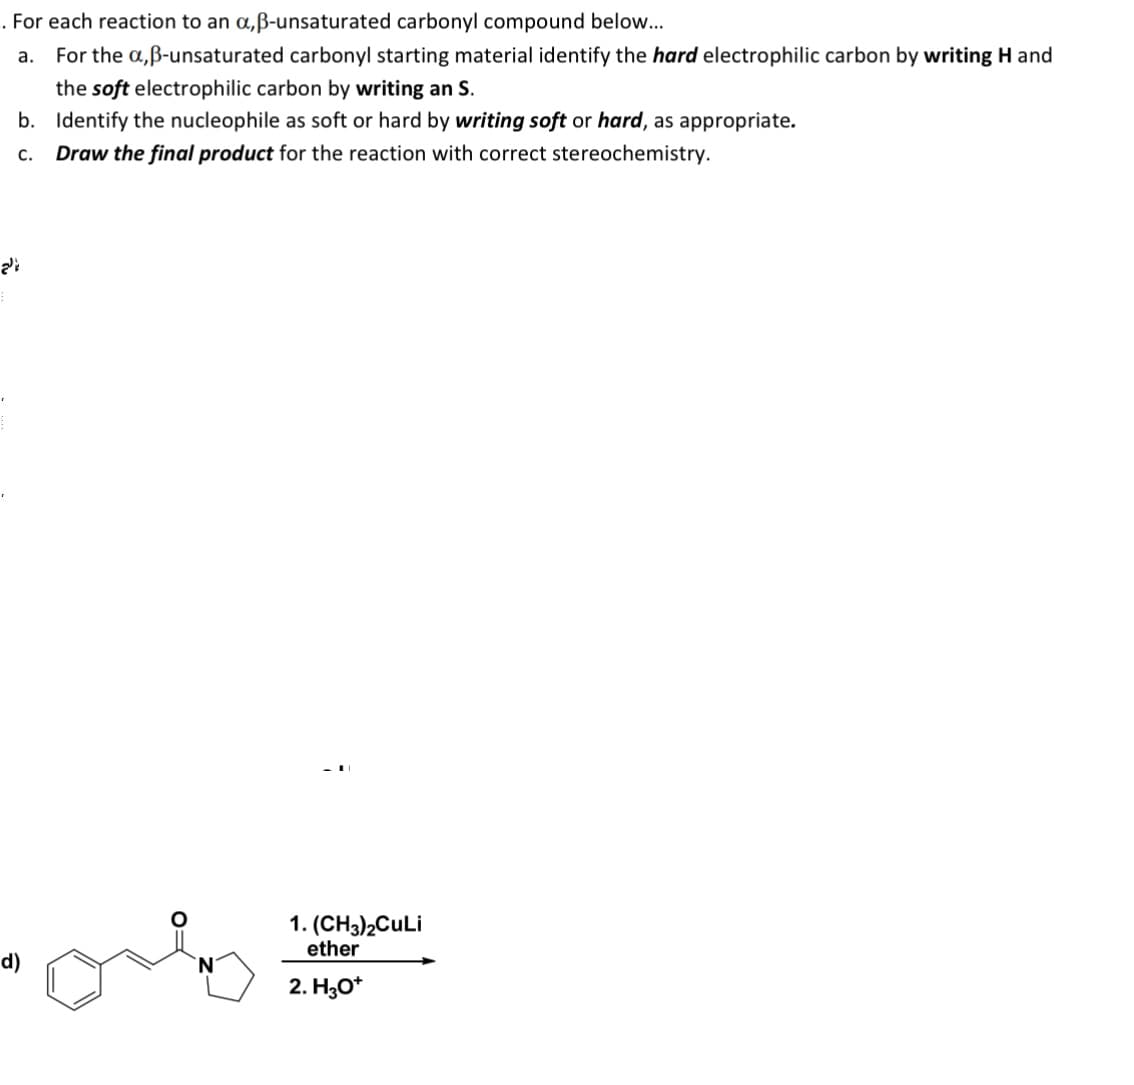 ་
'
. For each reaction to an α,ẞ-unsaturated carbonyl compound below...
a. For the a,ẞ-unsaturated carbonyl starting material identify the hard electrophilic carbon by writing H and
the soft electrophilic carbon by writing an S.
b. Identify the nucleophile as soft or hard by writing soft or hard, as appropriate.
C. Draw the final product for the reaction with correct stereochemistry.
الح
d)
1. (CH3)2CuLi
ether
2. H3O+